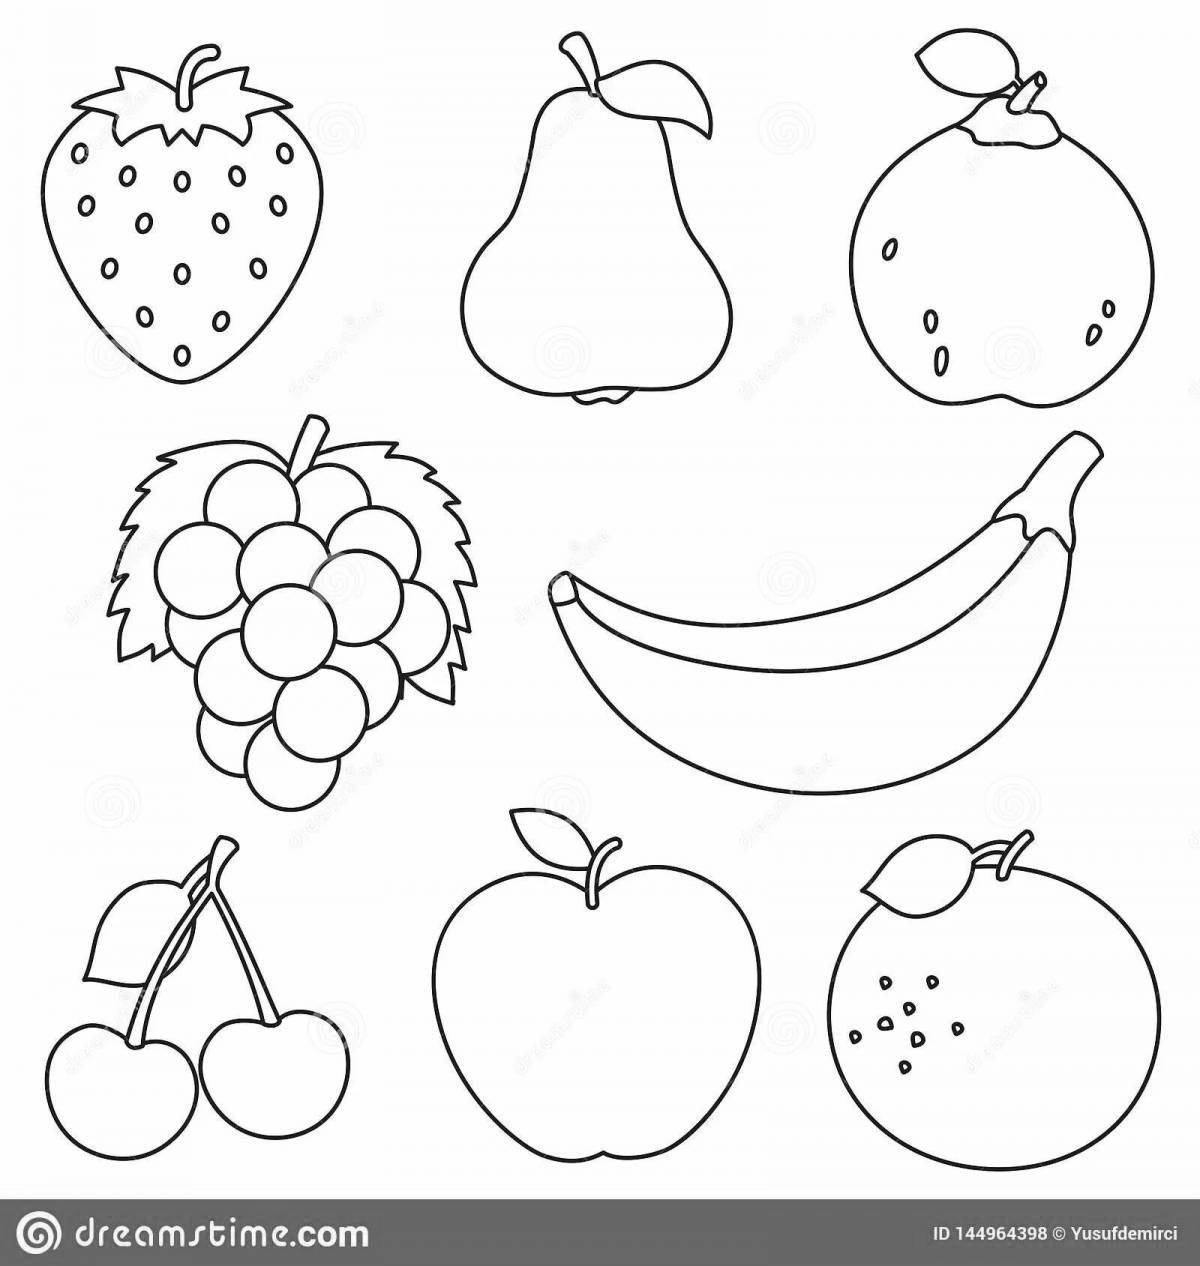 Lovely fruits and vegetables coloring book